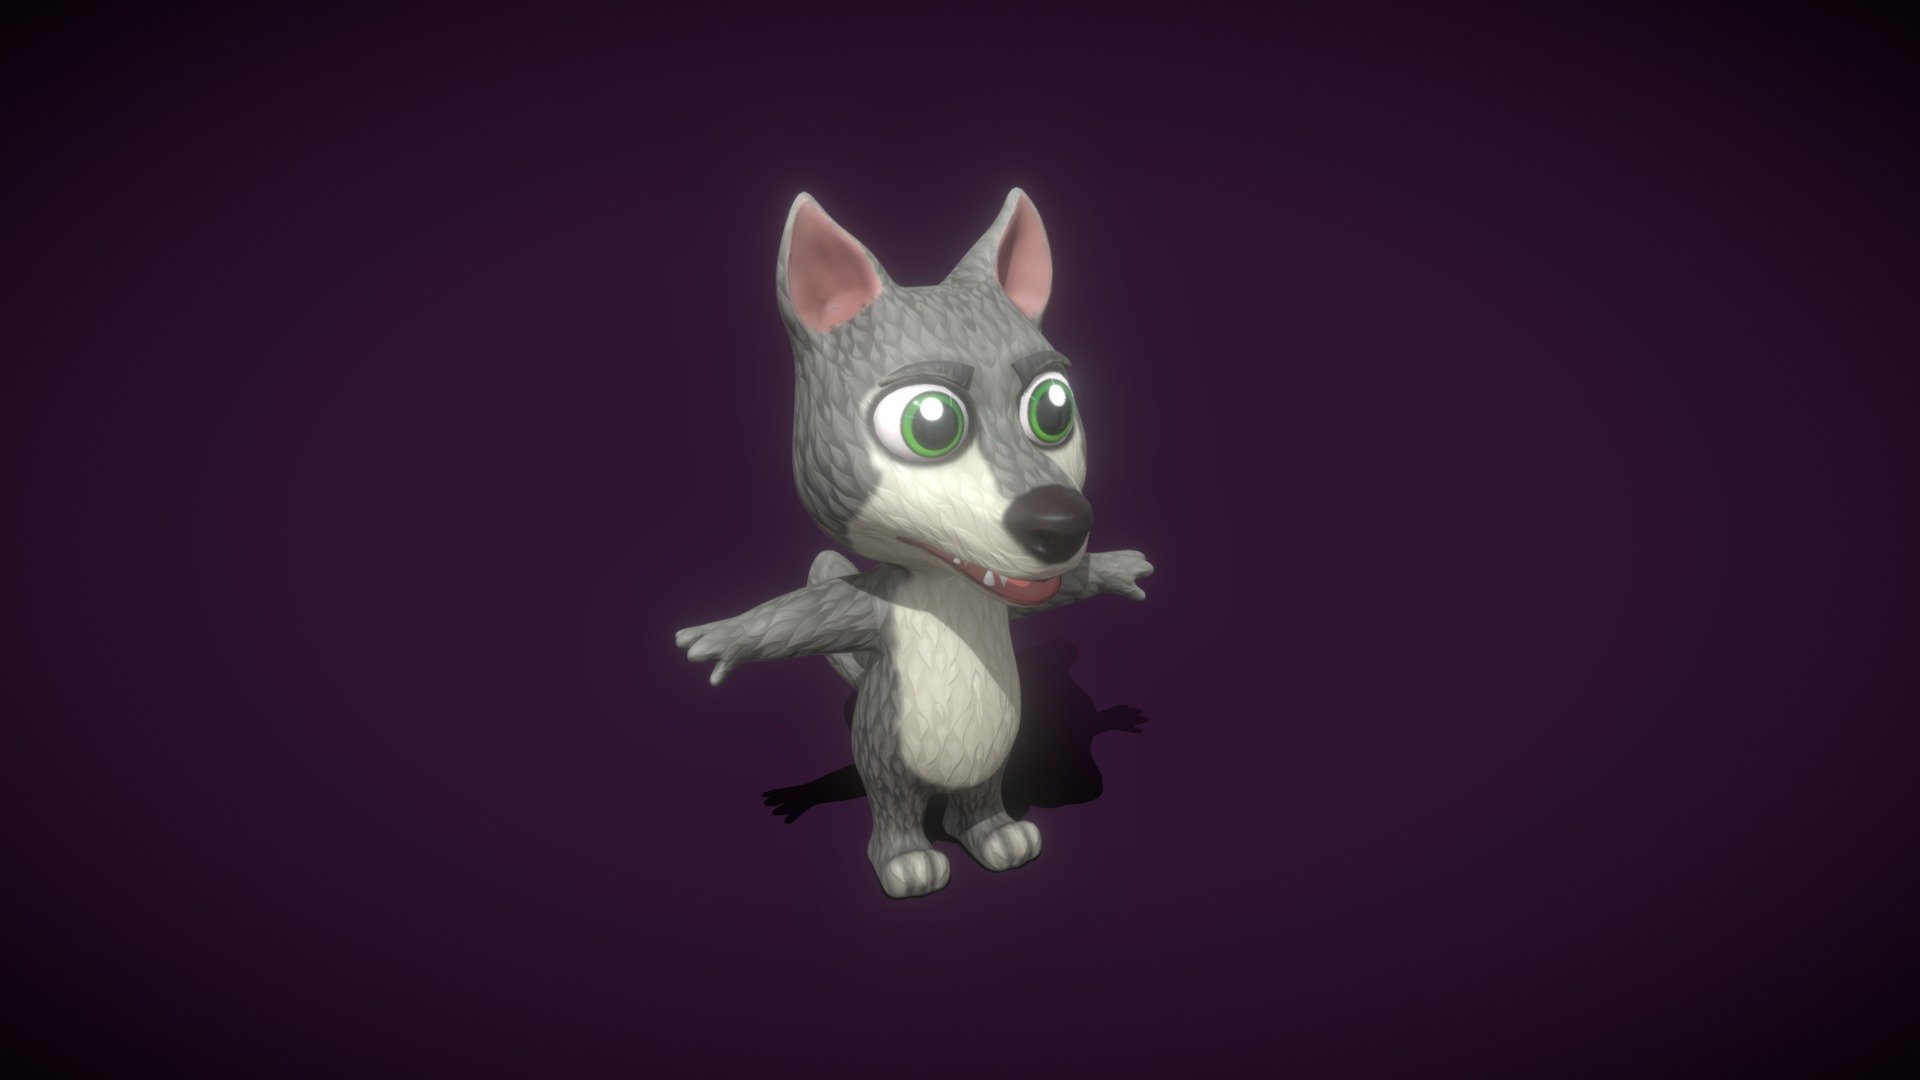 Cartoon Wolf Rigged 3D Model is completely ready to be used in your games, animations, films, designs etc.  

All textures and materials are included and mapped in every format. The model is completely ready for visualization in any 3d software and engine.  

Technical details:  




File formats included in the package are: FBX, OBJ, GLB, ABC, DAE, PLY, STL, BLEND, gLTF (generated), USDZ (generated)

Native software file format: BLEND

Render engine: Eevee

Polygons: 11,748

Vertices: 11,452

Textures: Color, Metallic, Roughness, Normal, AO

All textures are 2k resolution

The model is rigged

We have another model with animations

Only following formats contain rig: BLEND, FBX, GLTF/GLB
 - Cartoon Wolf Rigged 3D Model - Buy Royalty Free 3D model by 3DDisco 3d model